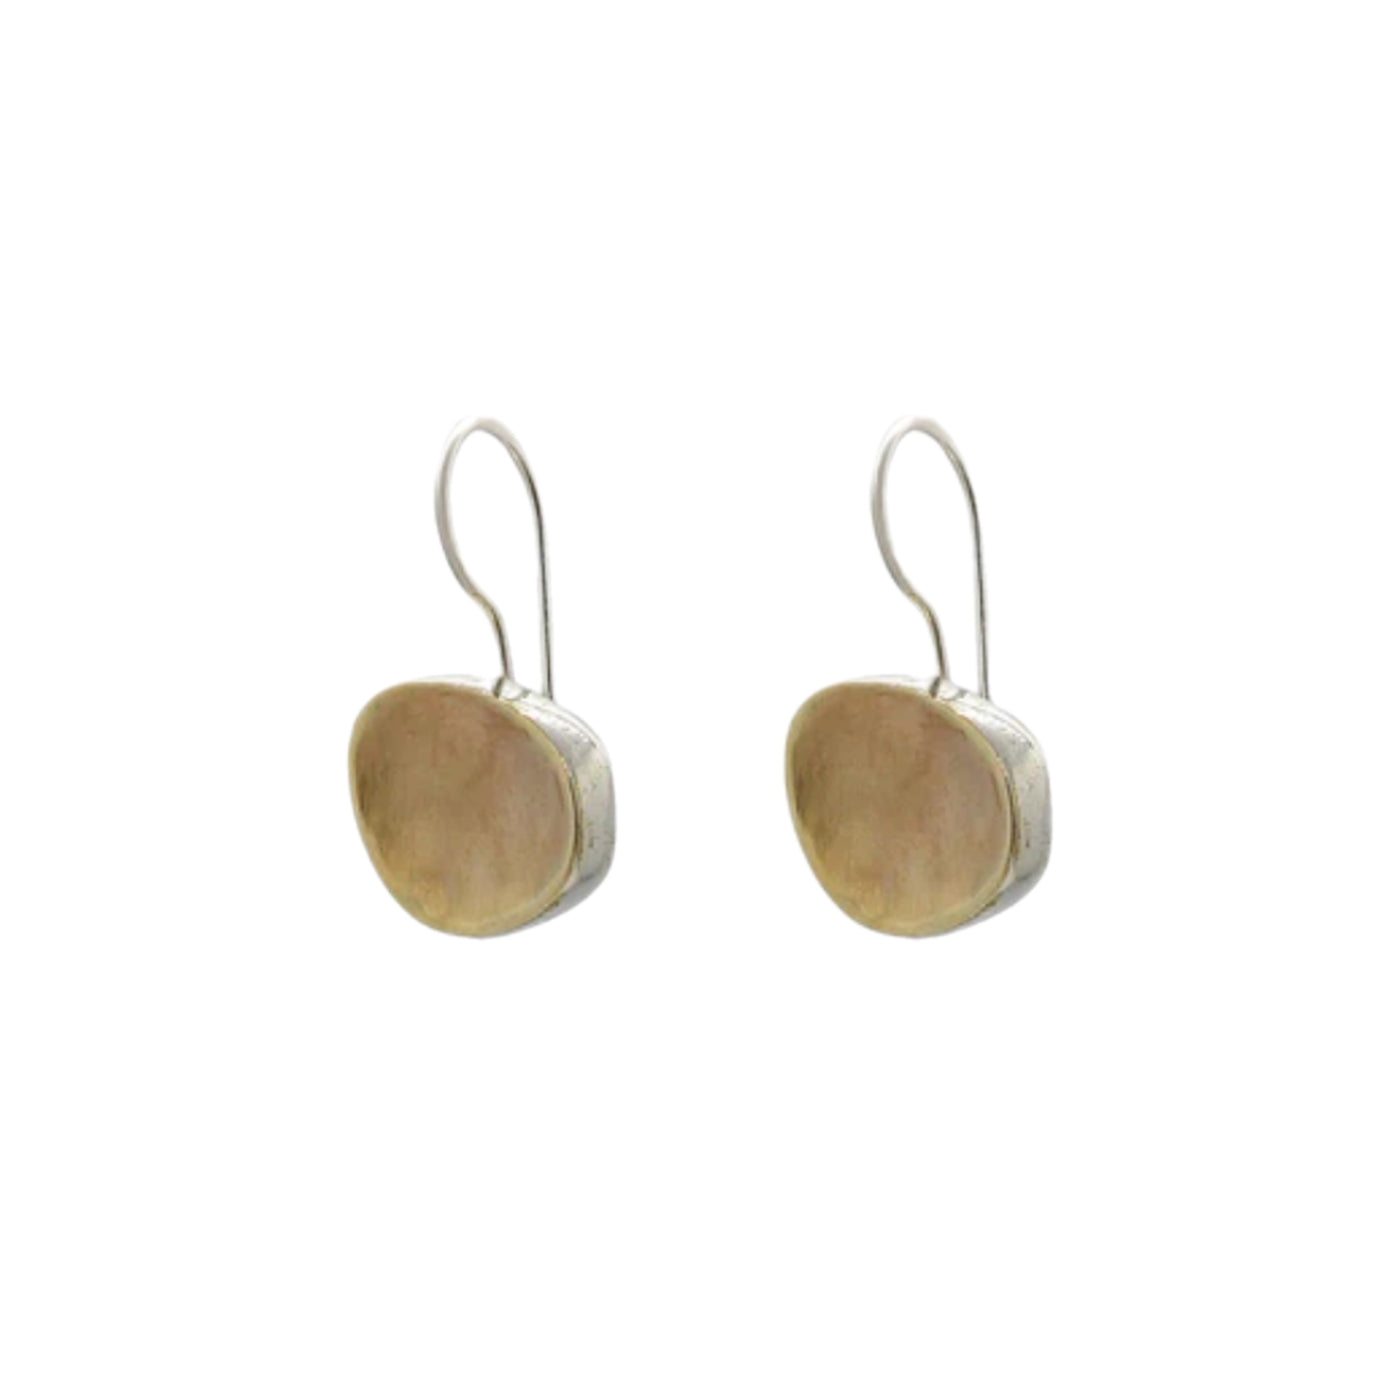 Sterling silver, 9ct yellow gold handcrafted Israeli drop earrings 